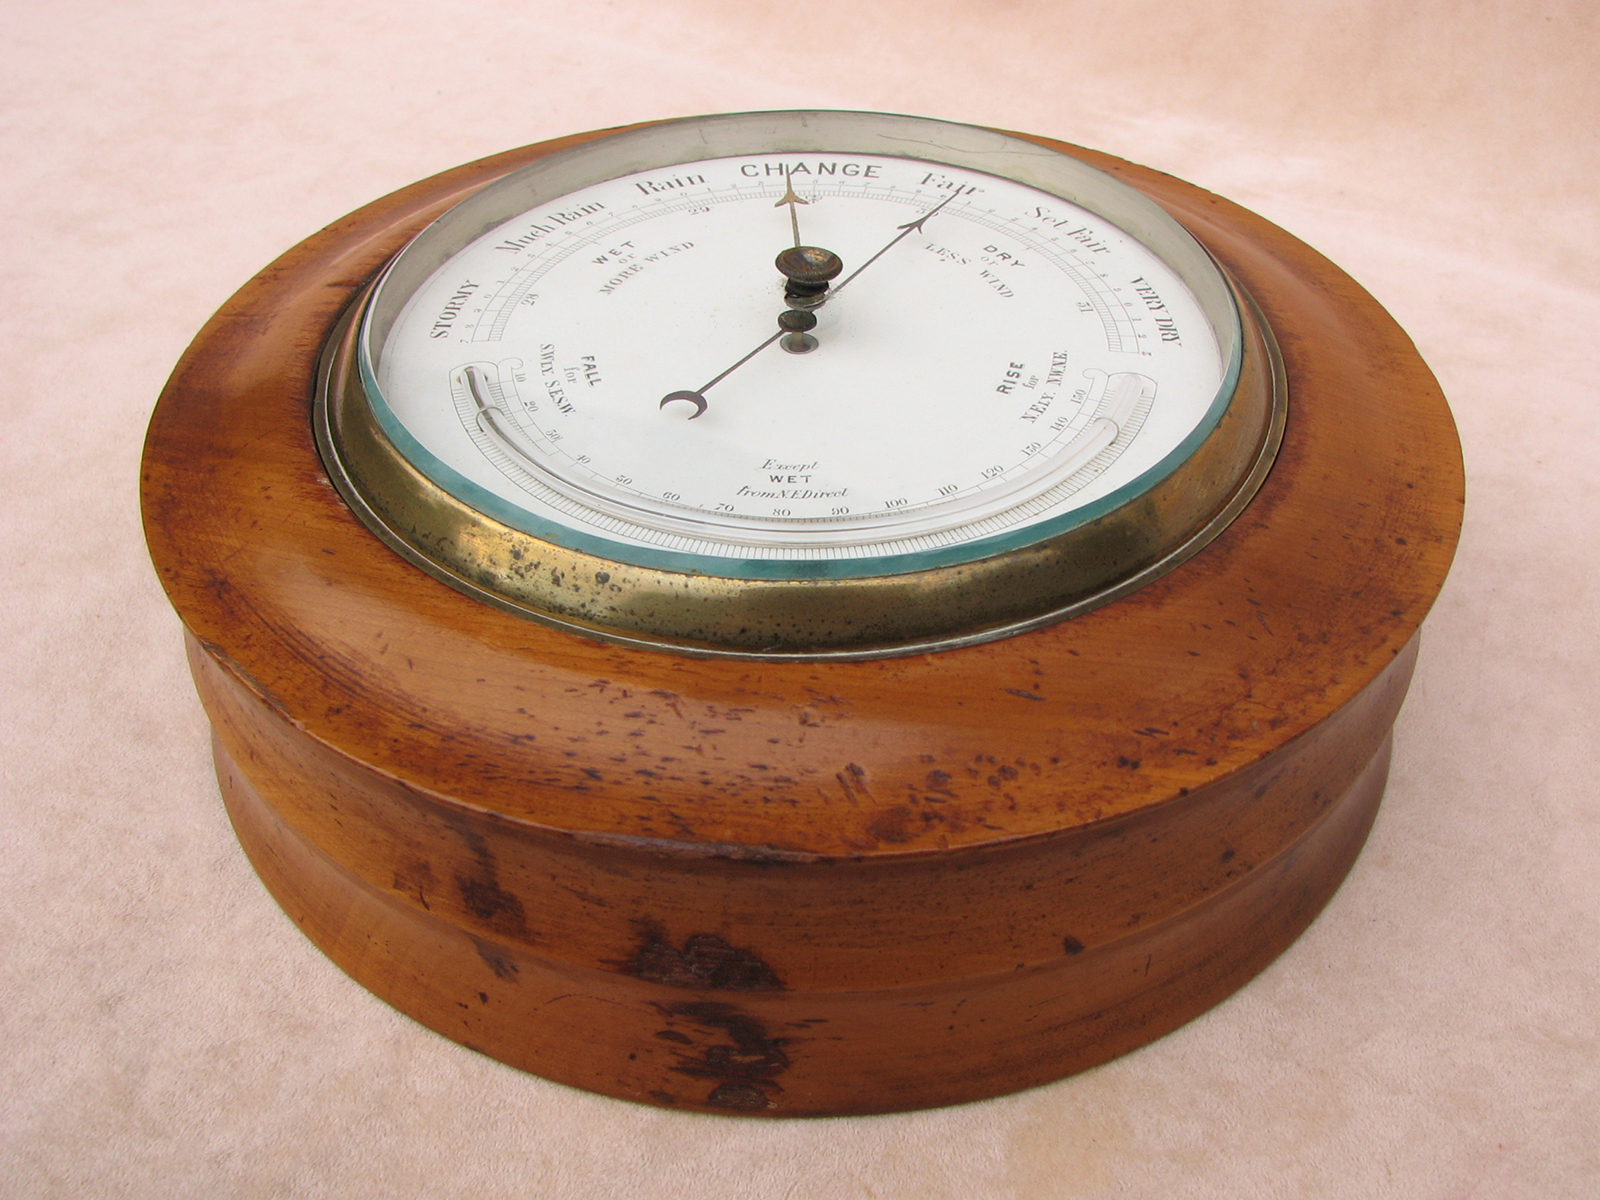 Late 19th century wall barometer with curved thermometer